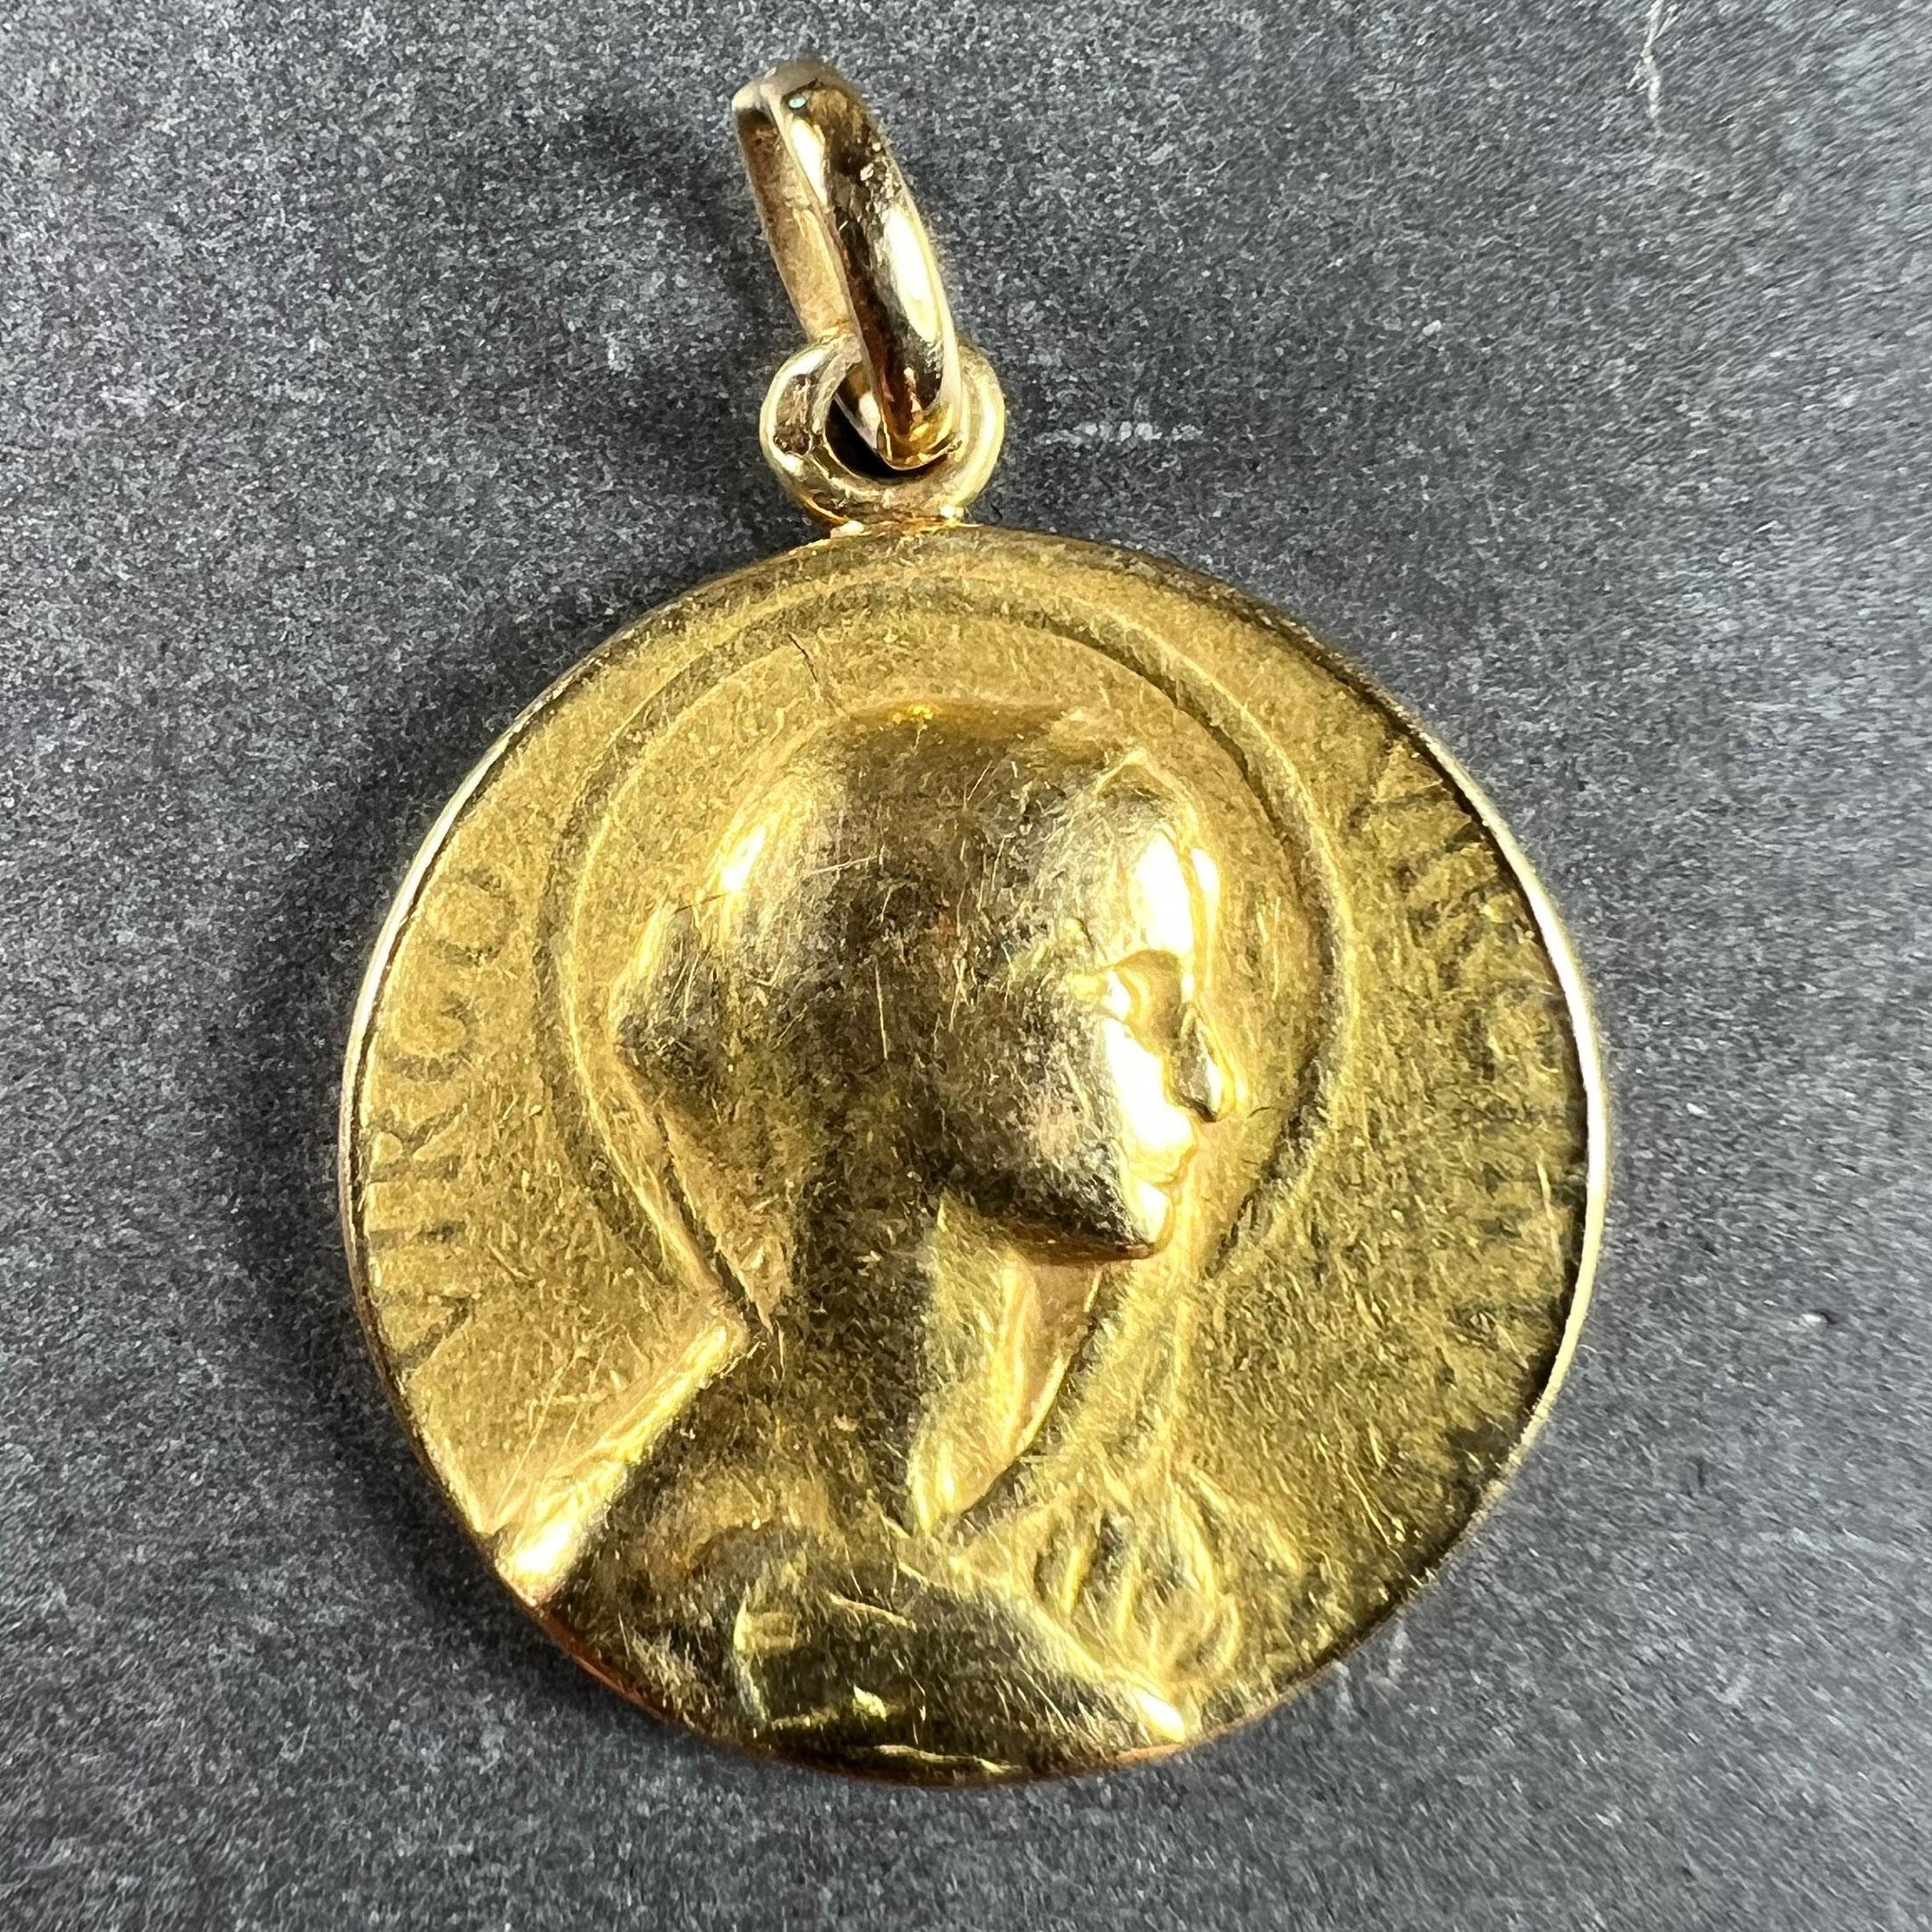 A French 18 karat (18K) yellow gold charm pendant designed as a round medal with a relief of the Virgin Mary in profile with a halo, with the Latin motto 'VIRGO VIRGINUM' (Virgin of Virgins) surrounding. The reverse depicts the letter M on a cloud